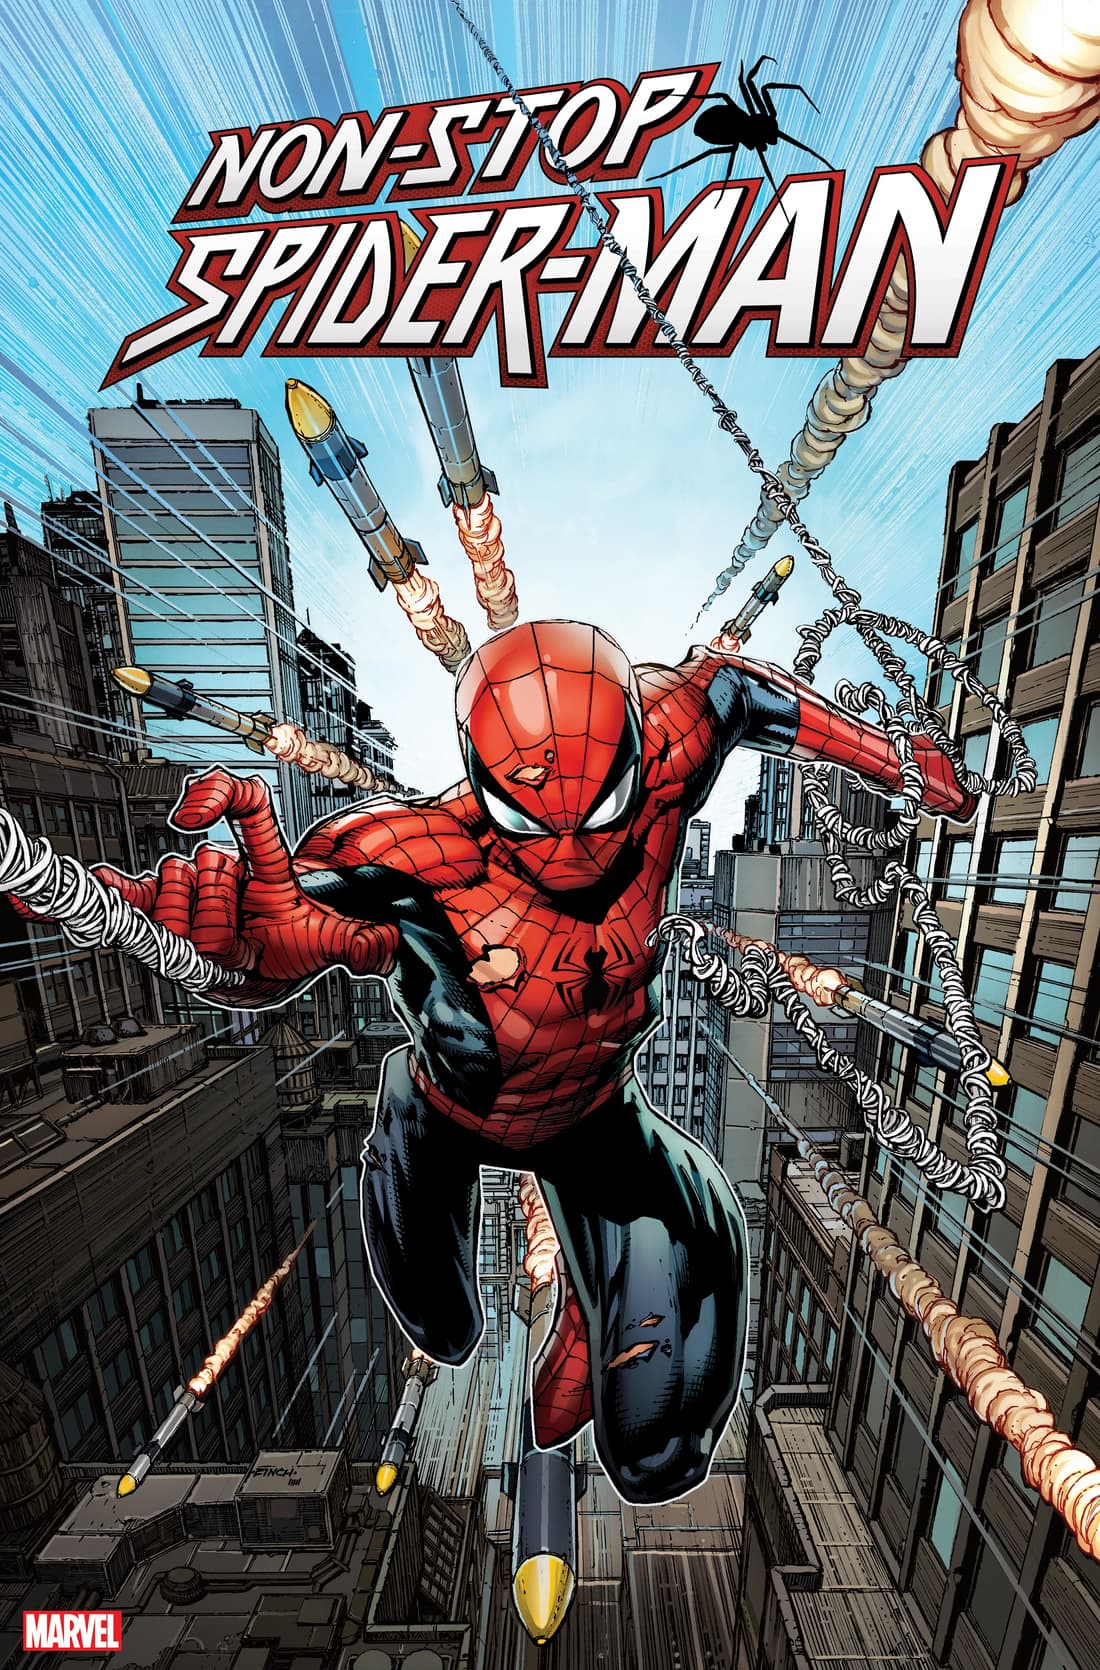 NON-STOP SPIDER-MAN #1 cover by David Finch